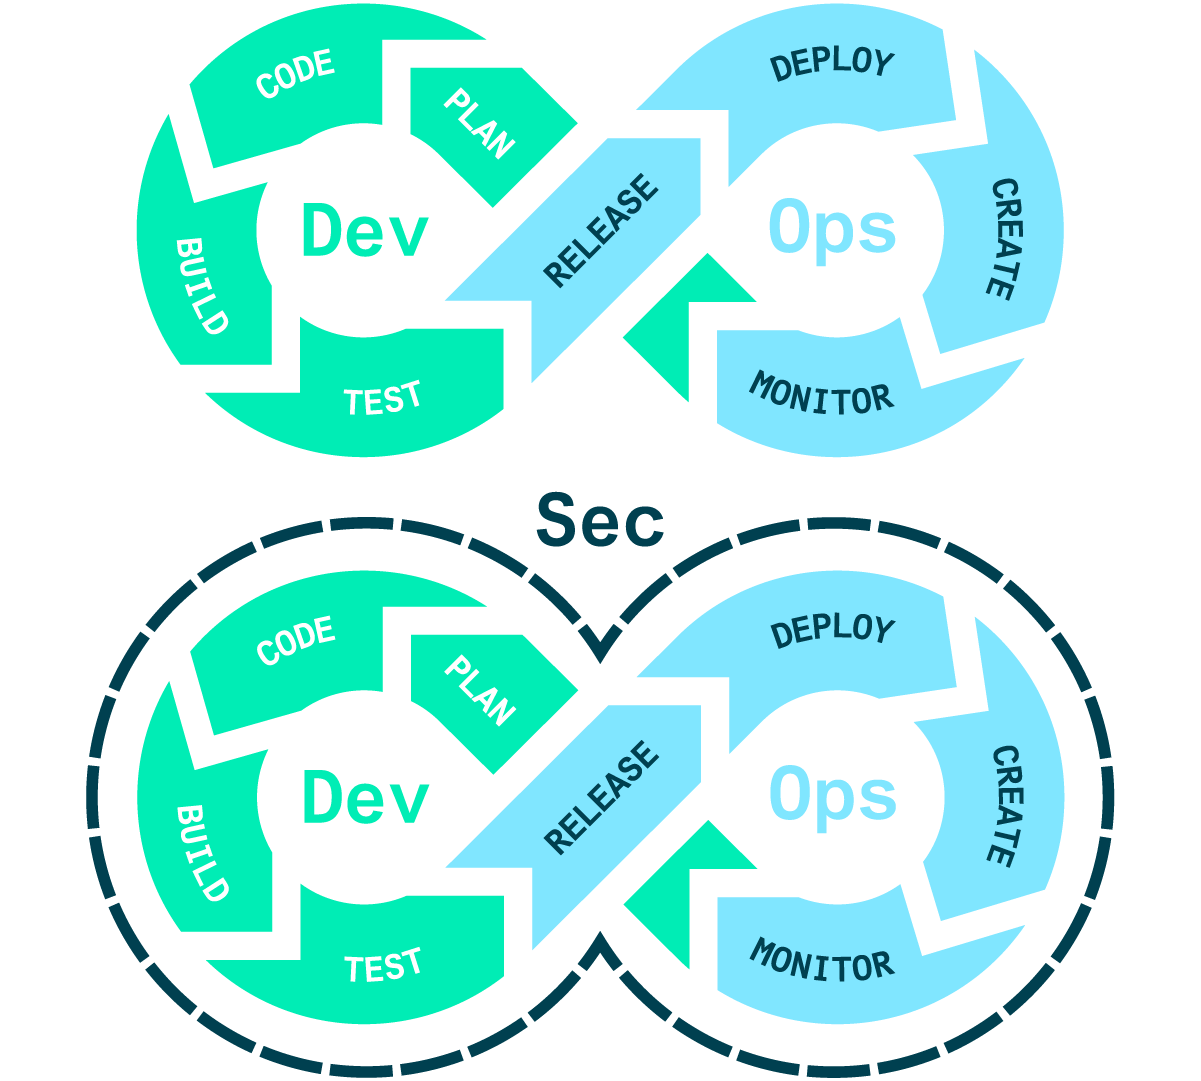 Diagram showing the DevOps Vs DevSecOps showing the overlaying of the security testing throughout the DevOps cycle.